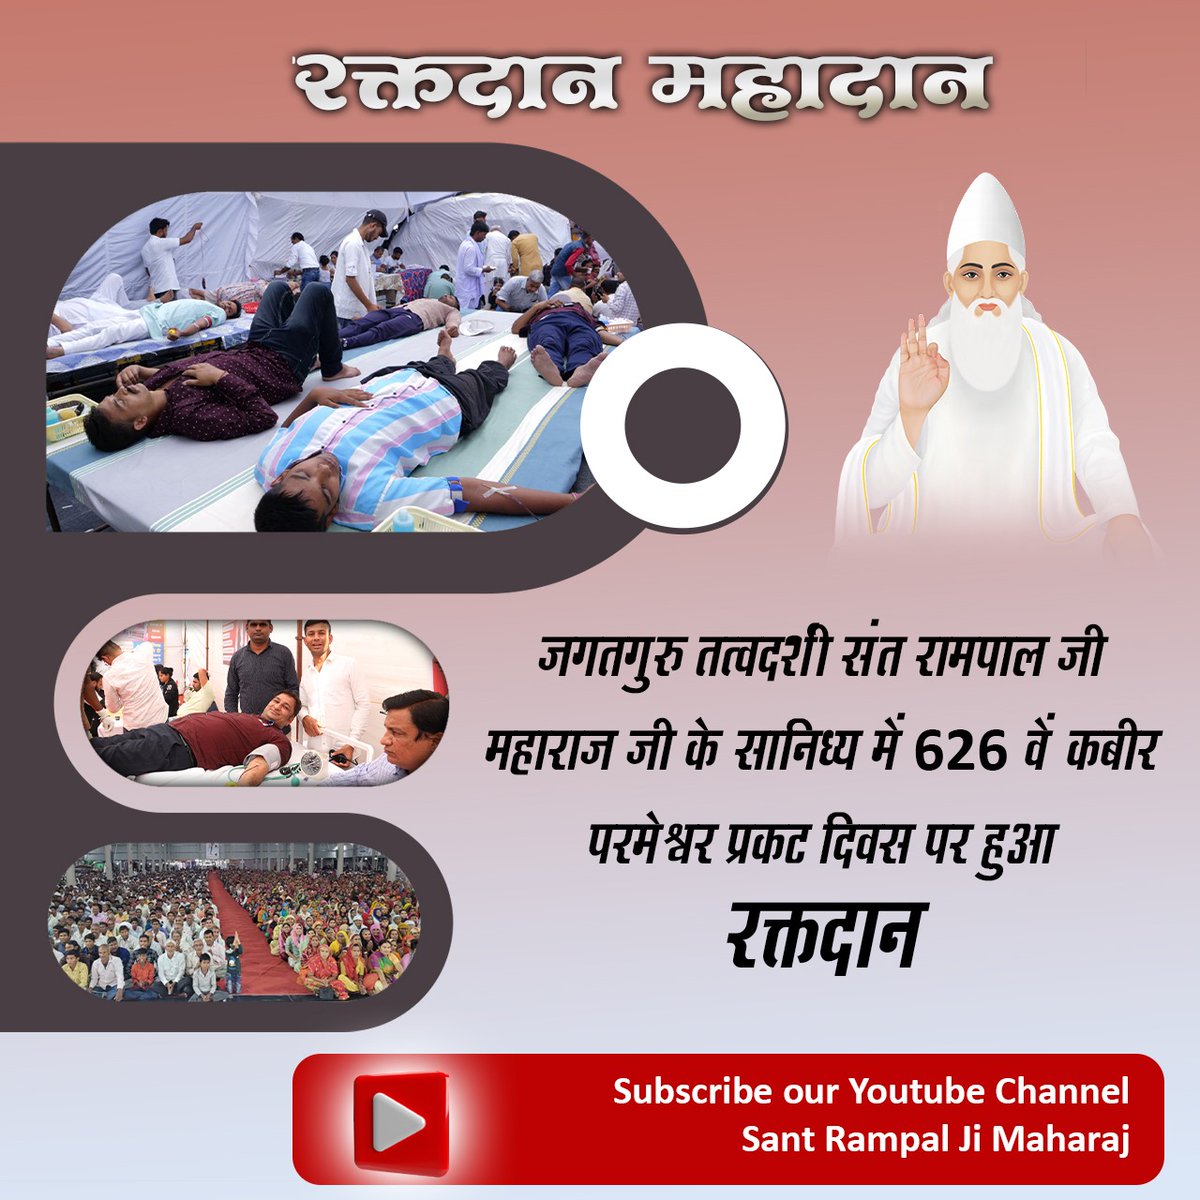 #ServiceToHumanity
The blood donated by the devotees of Sant Rampal Ji Maharaj is free from any sort of toxins as none of His disciples consume intoxicants of any kind!
👉For more info Must visit Sant Rampal Ji Maharaj YouTube channel 
Followers of Sant Rampal Ji